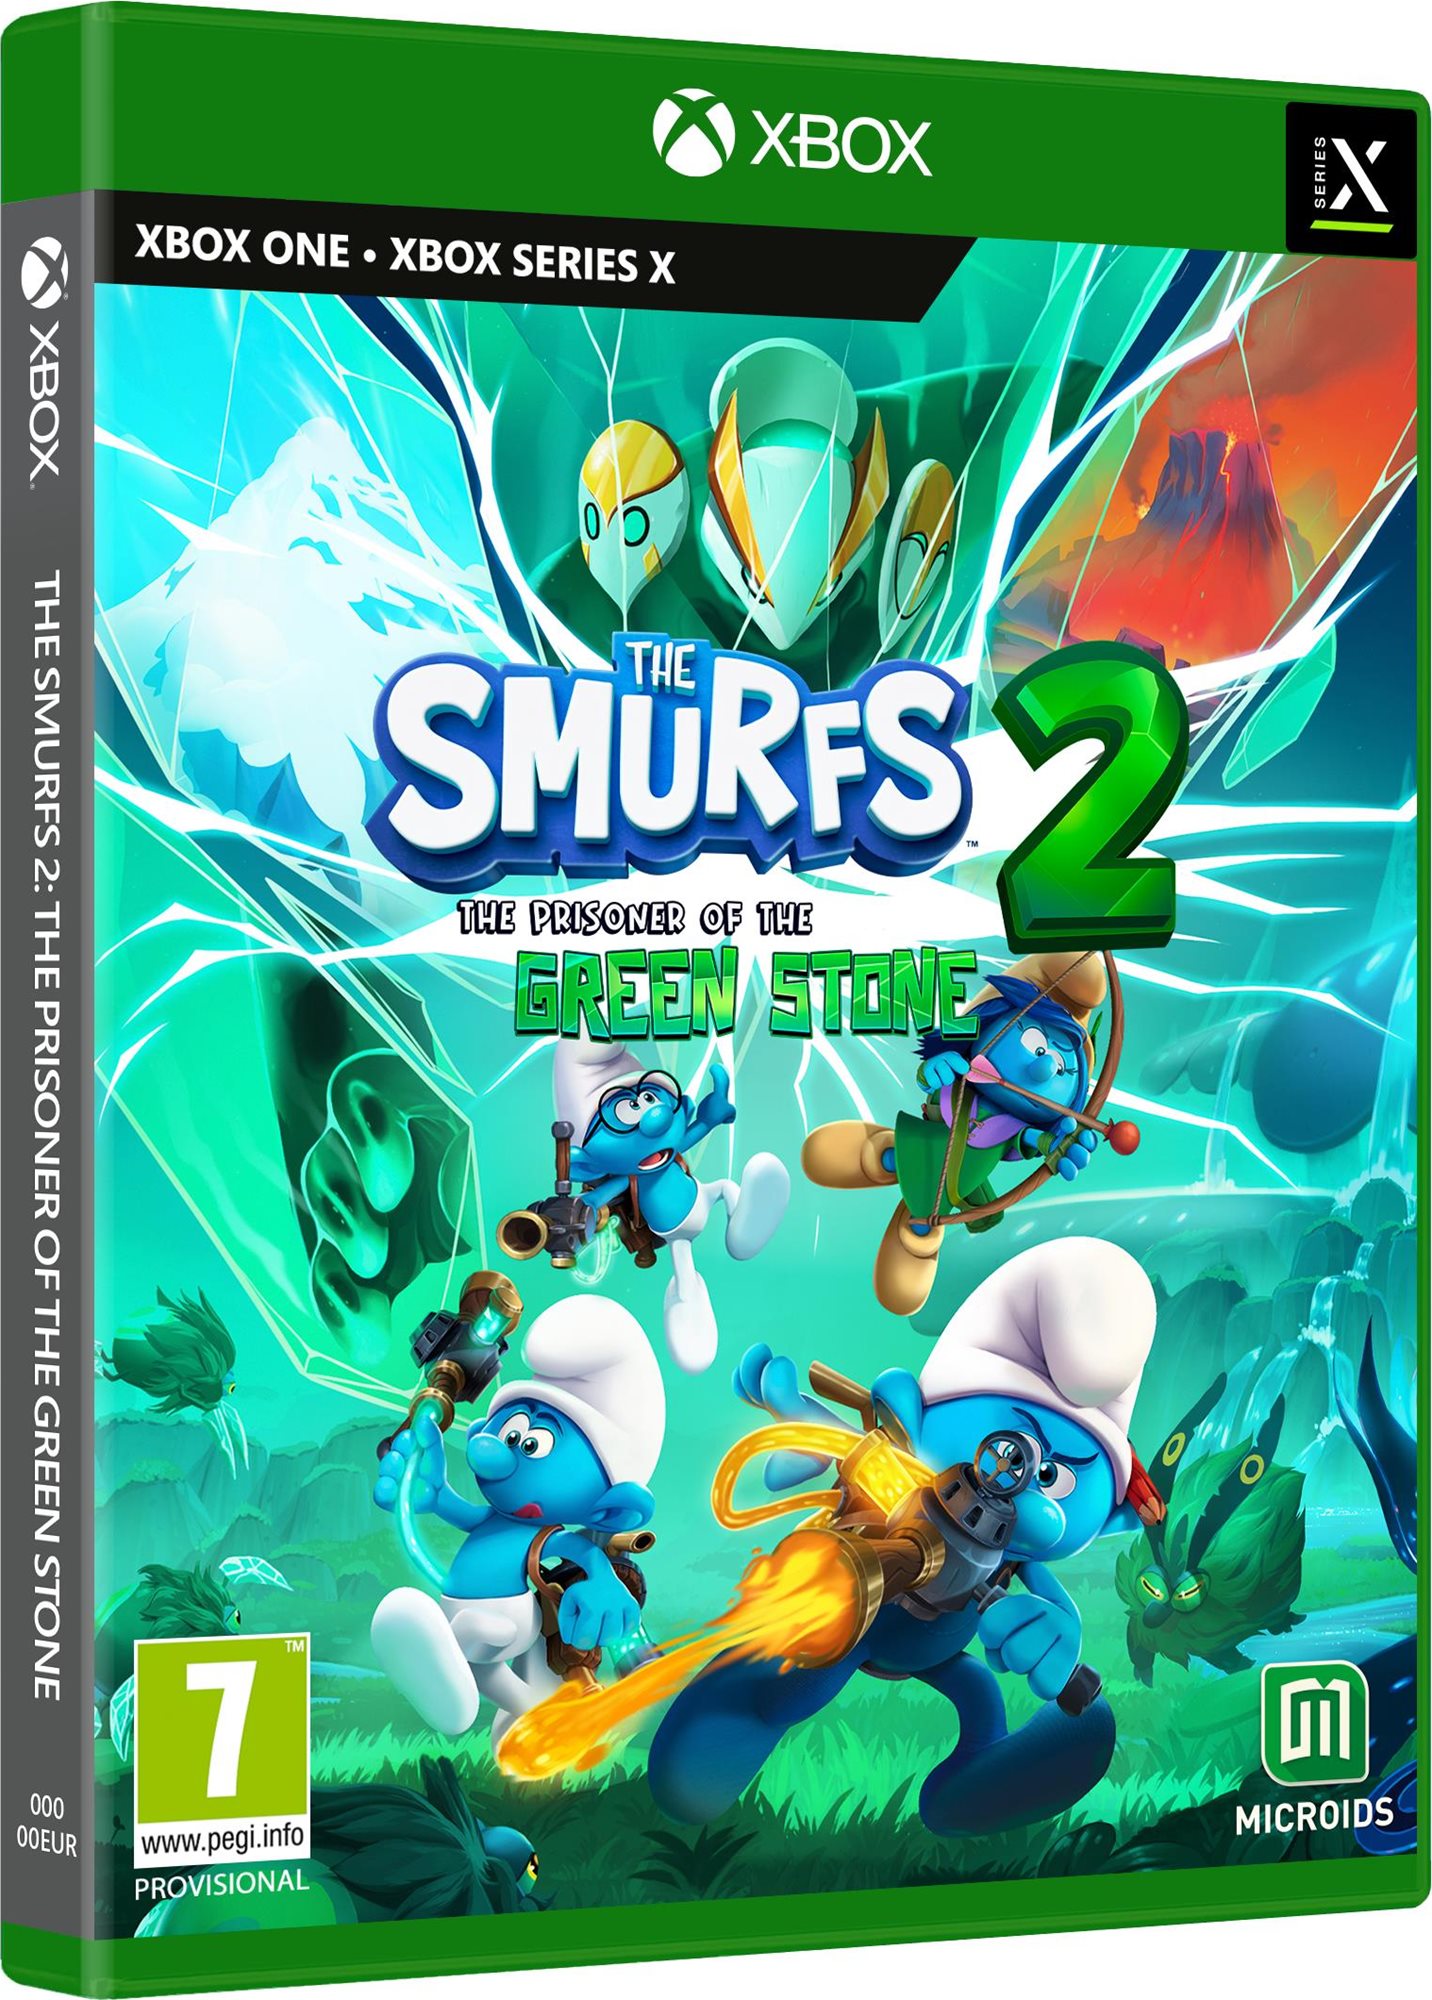 The Smurfs 2: The Prisoner of the Green Stone - Xbox